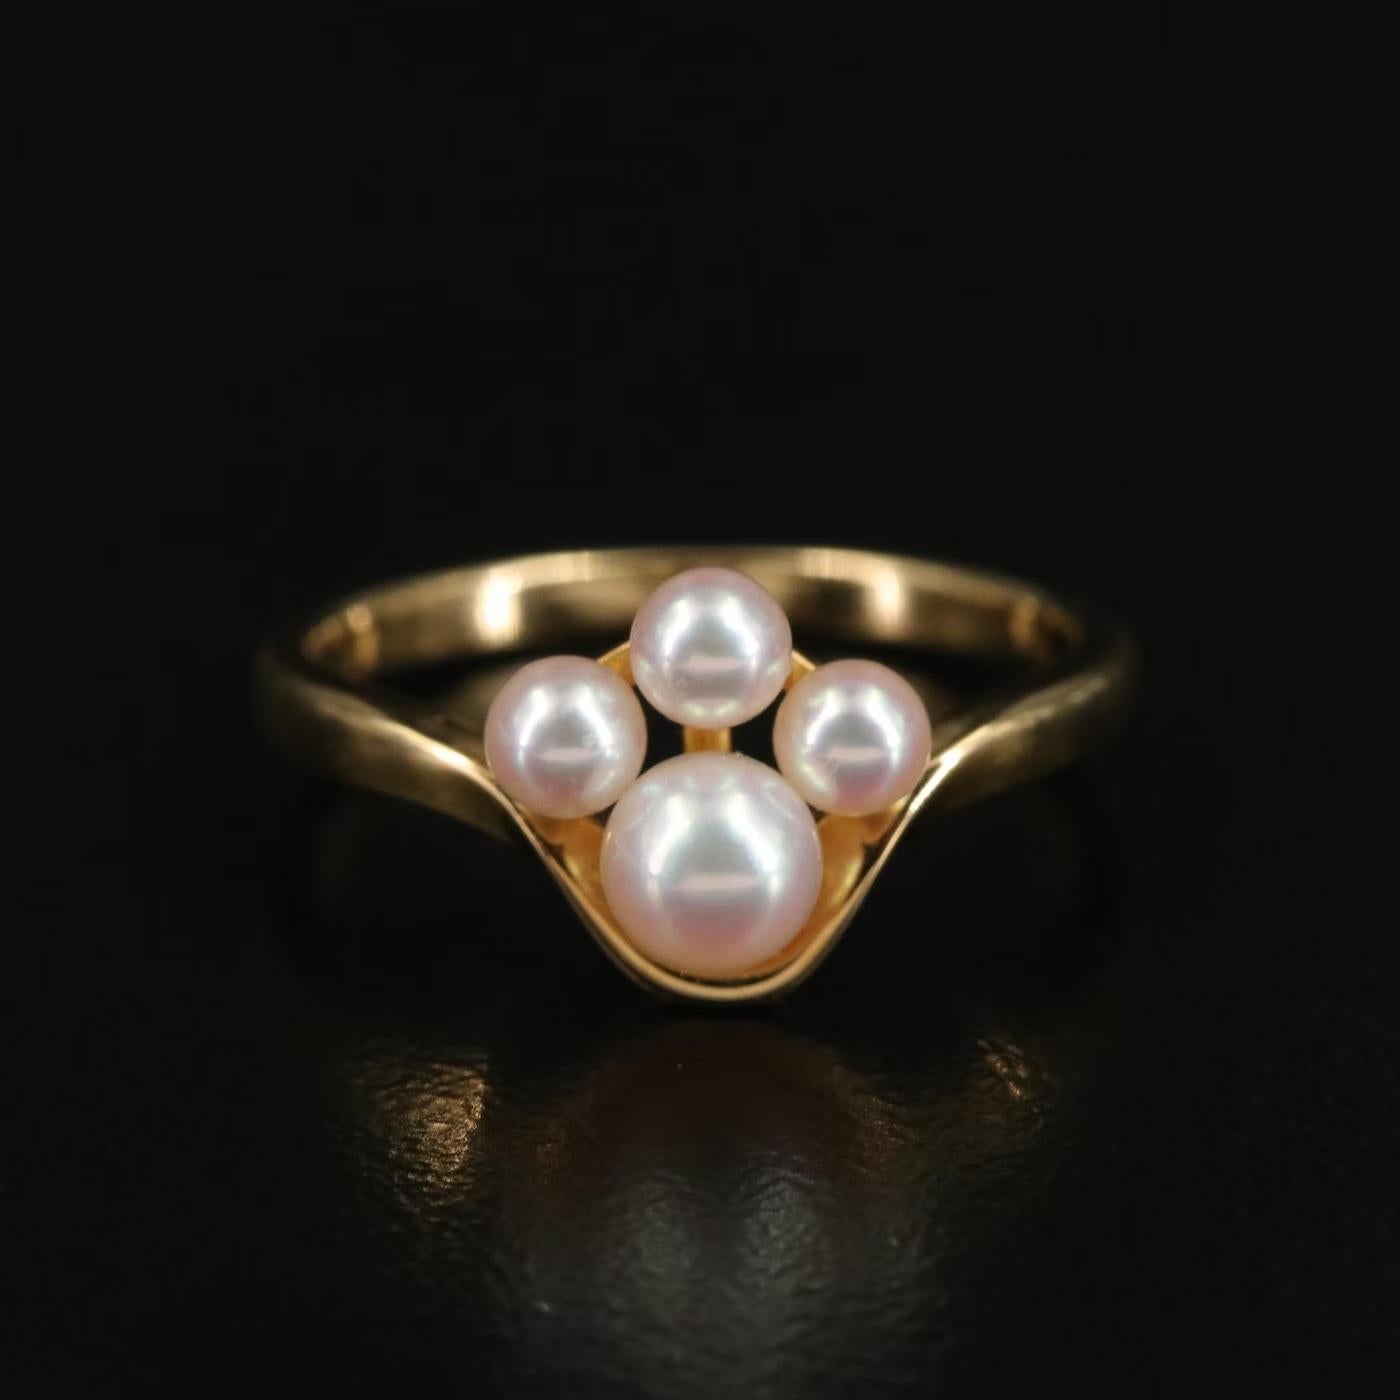 Mikimoto designer ring with Original Box

NEW with tags, tag price $3750

18K Yellow gold

The ring is size 5.5 US and can be re-sized by your local jeweler 

Mikimoto pearls, Japan - Ginza